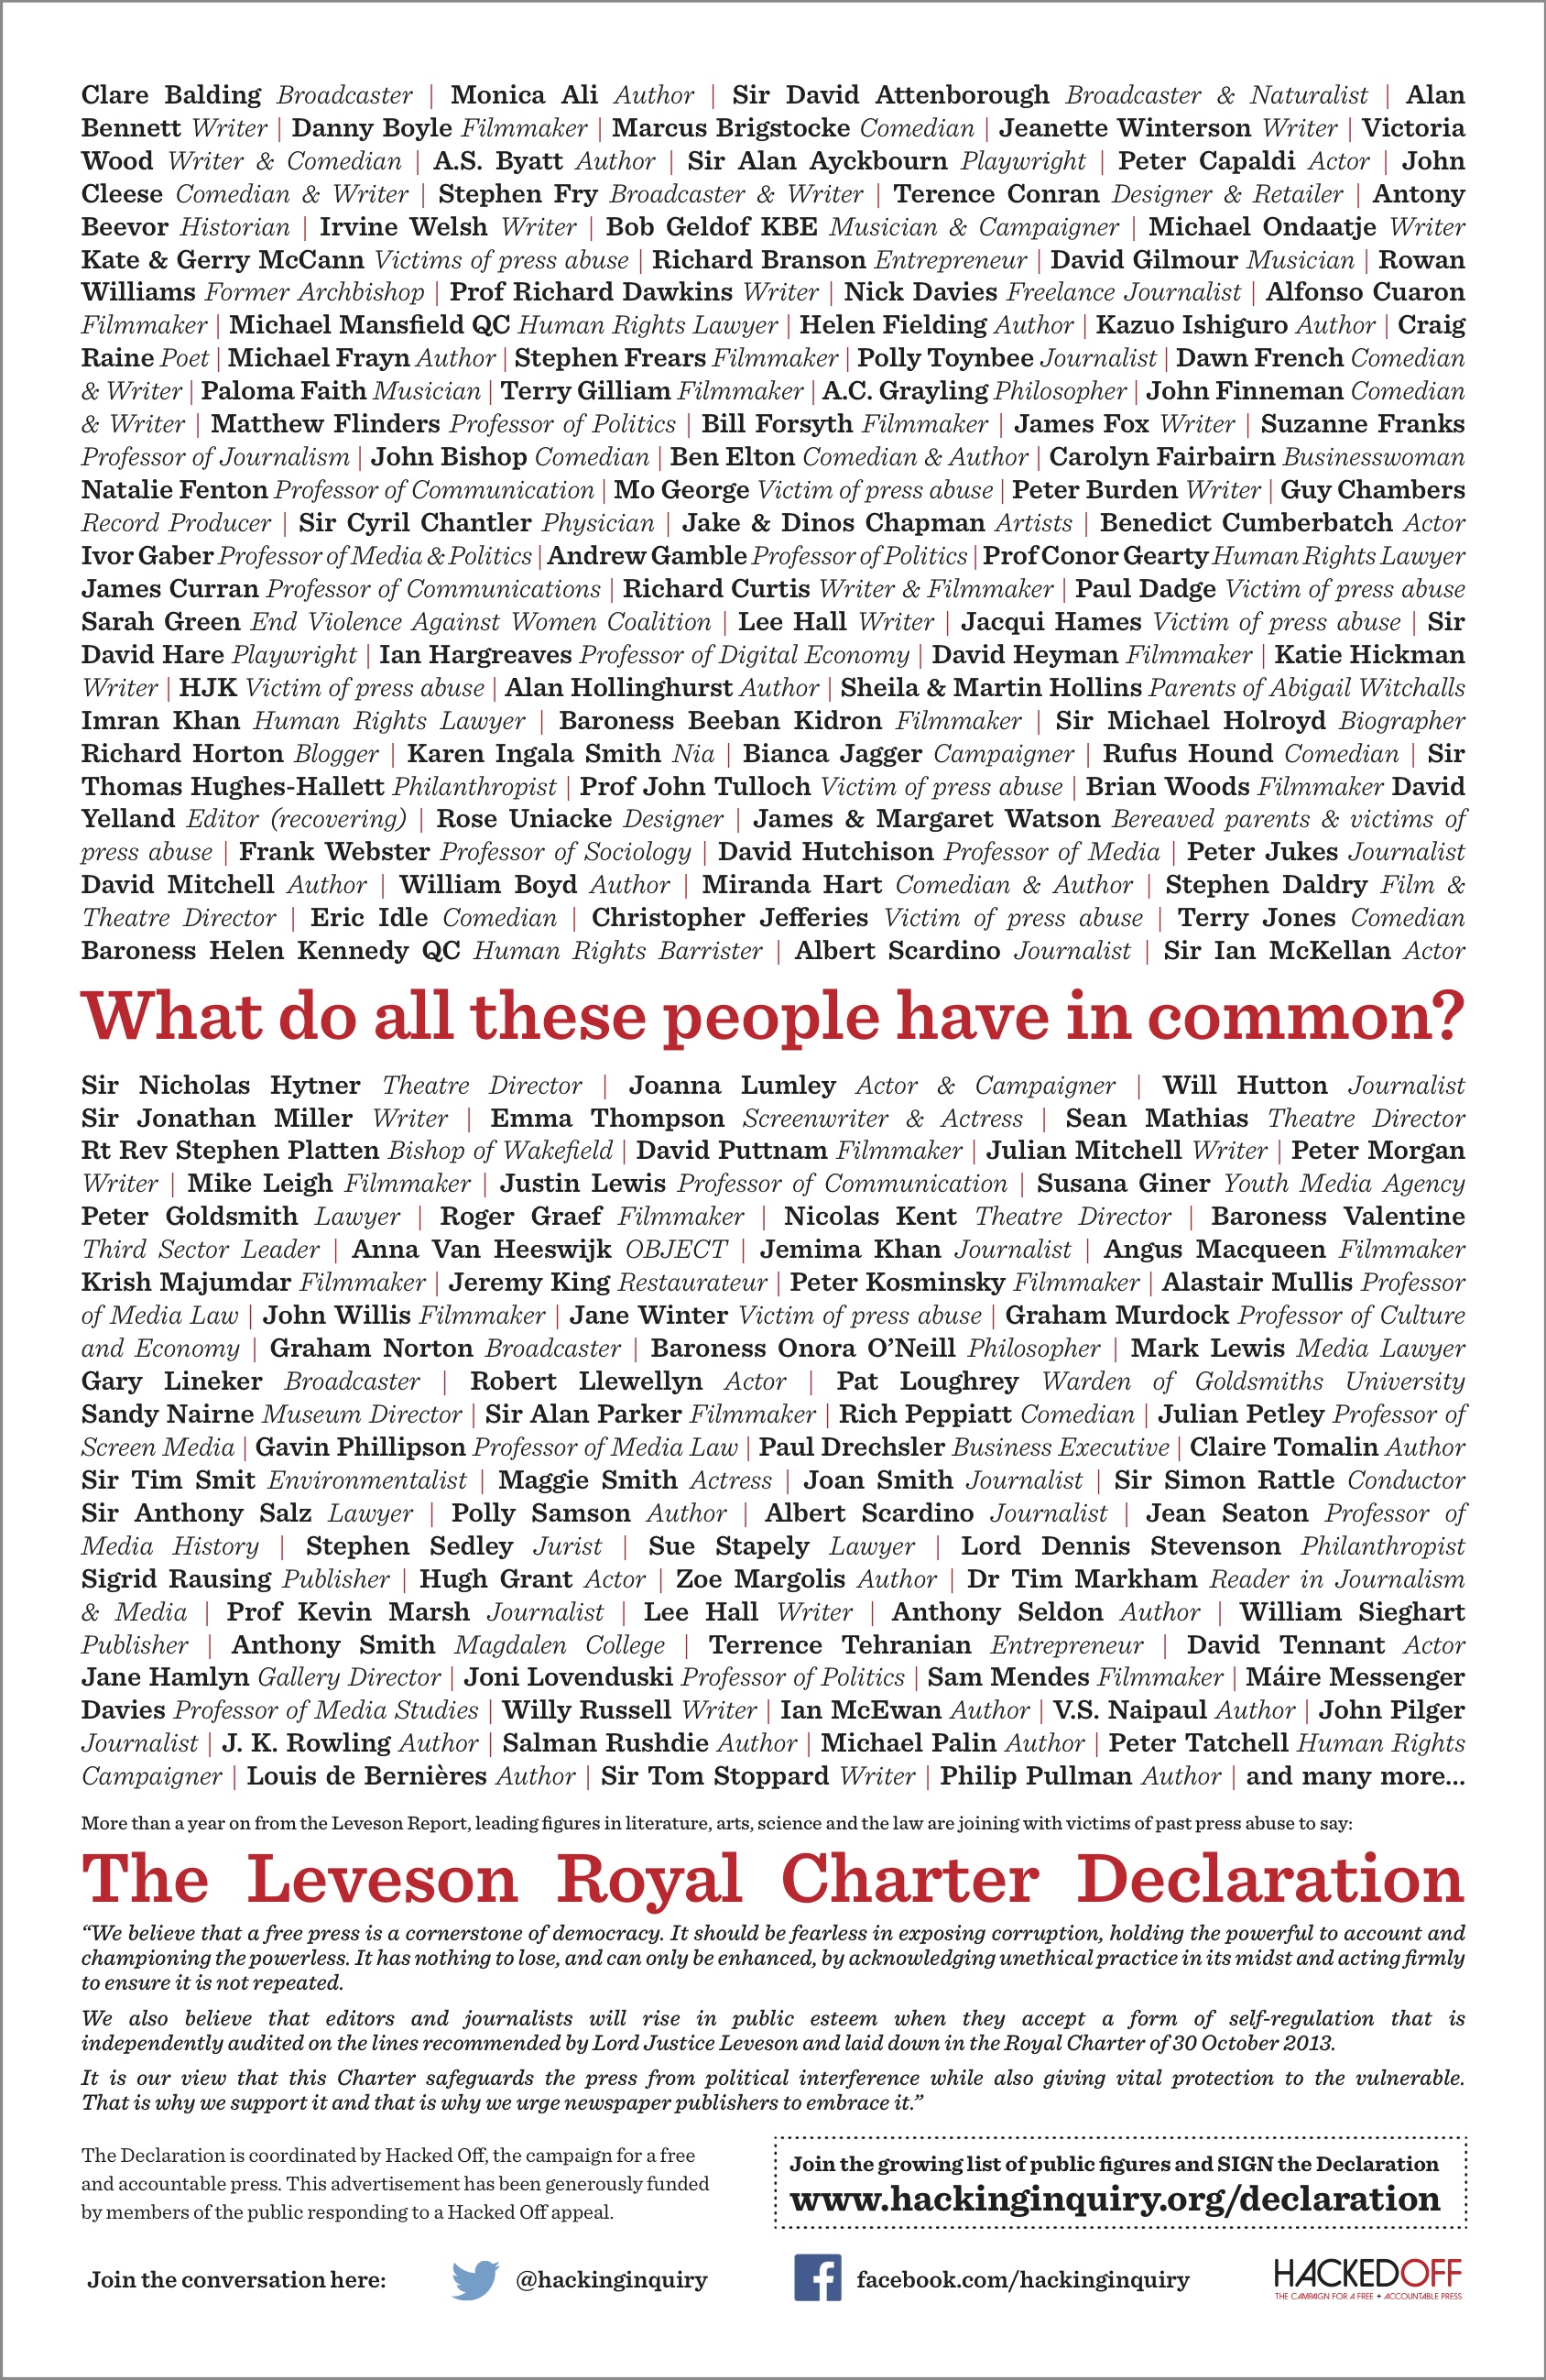 The Leveson Royal Charter Declaration, 18 March 2014